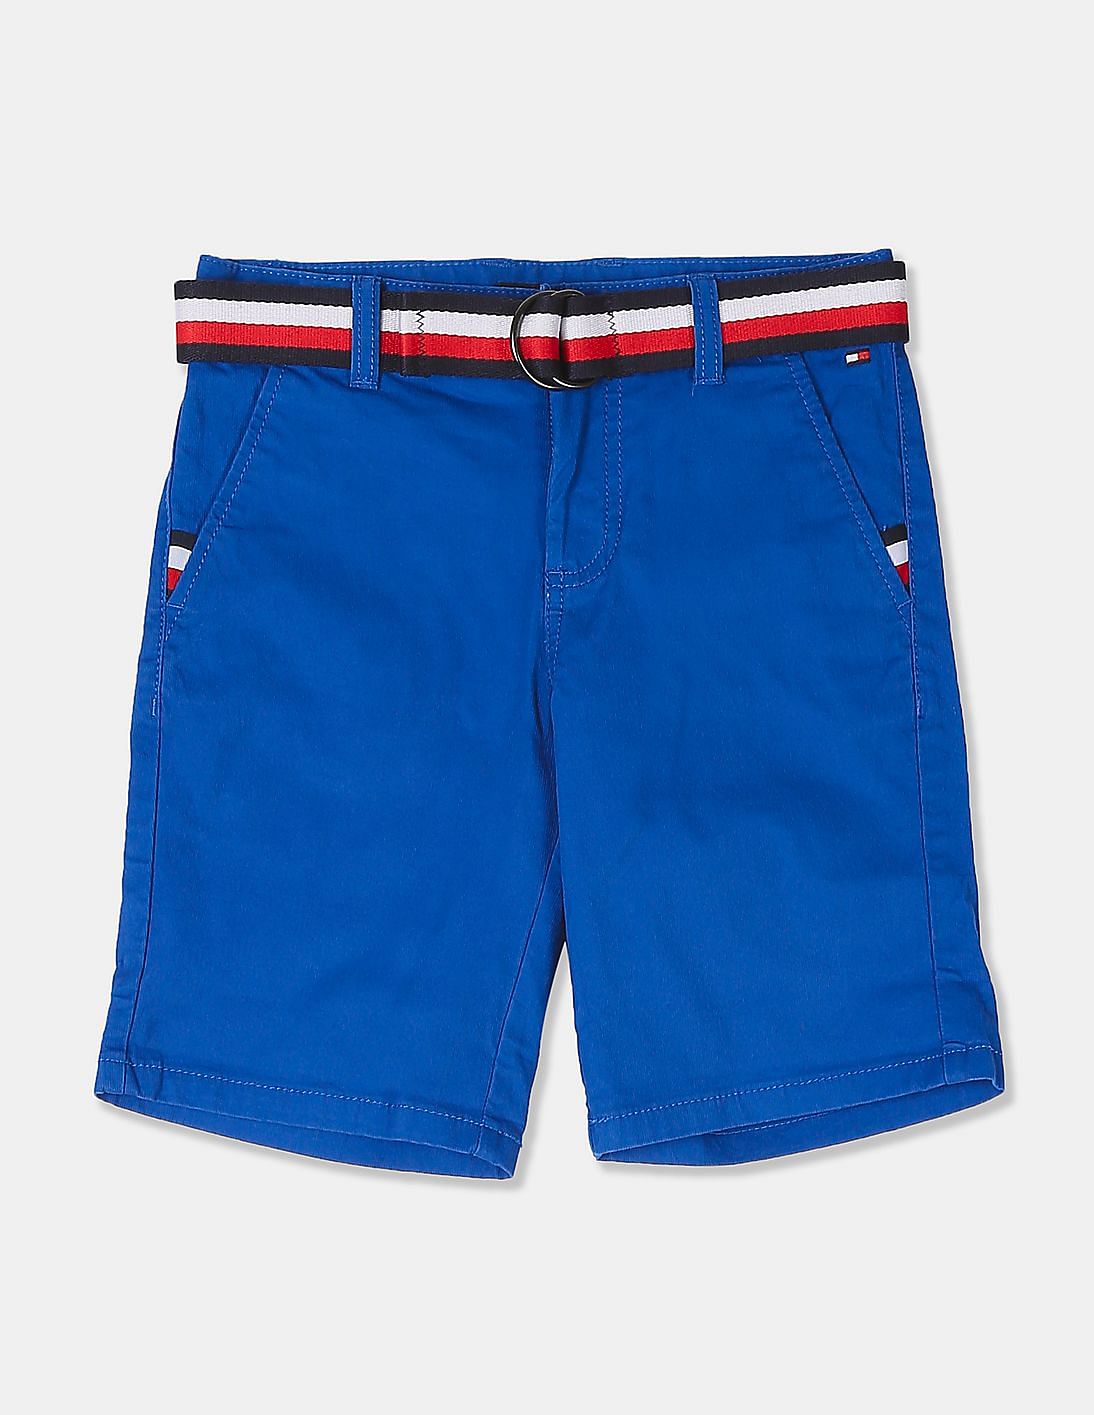 Buy Tommy Hilfiger Kids Boys Boys Blue Solid Essential Belted Chino ...